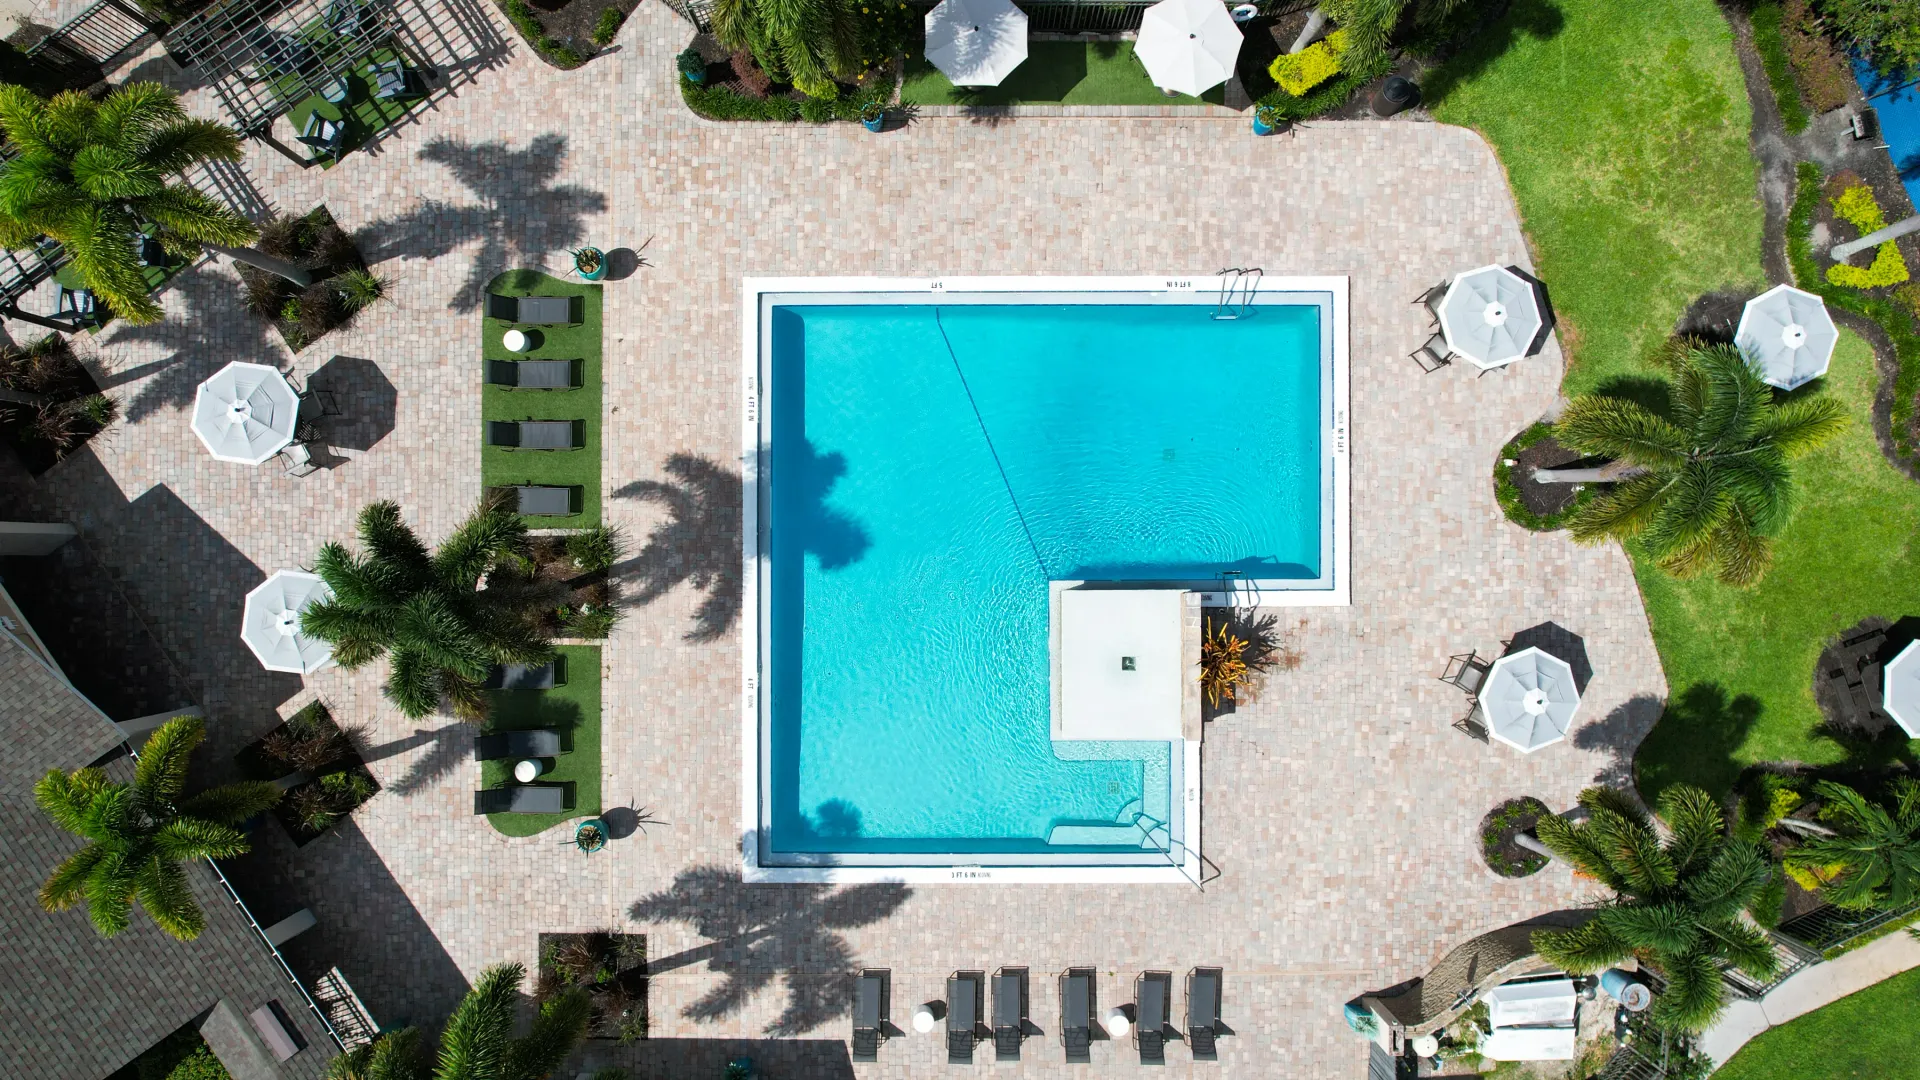 Aerial view of the resort-style pool at Harper Grand, showcasing lounging areas, umbrellas, and lush landscaping.